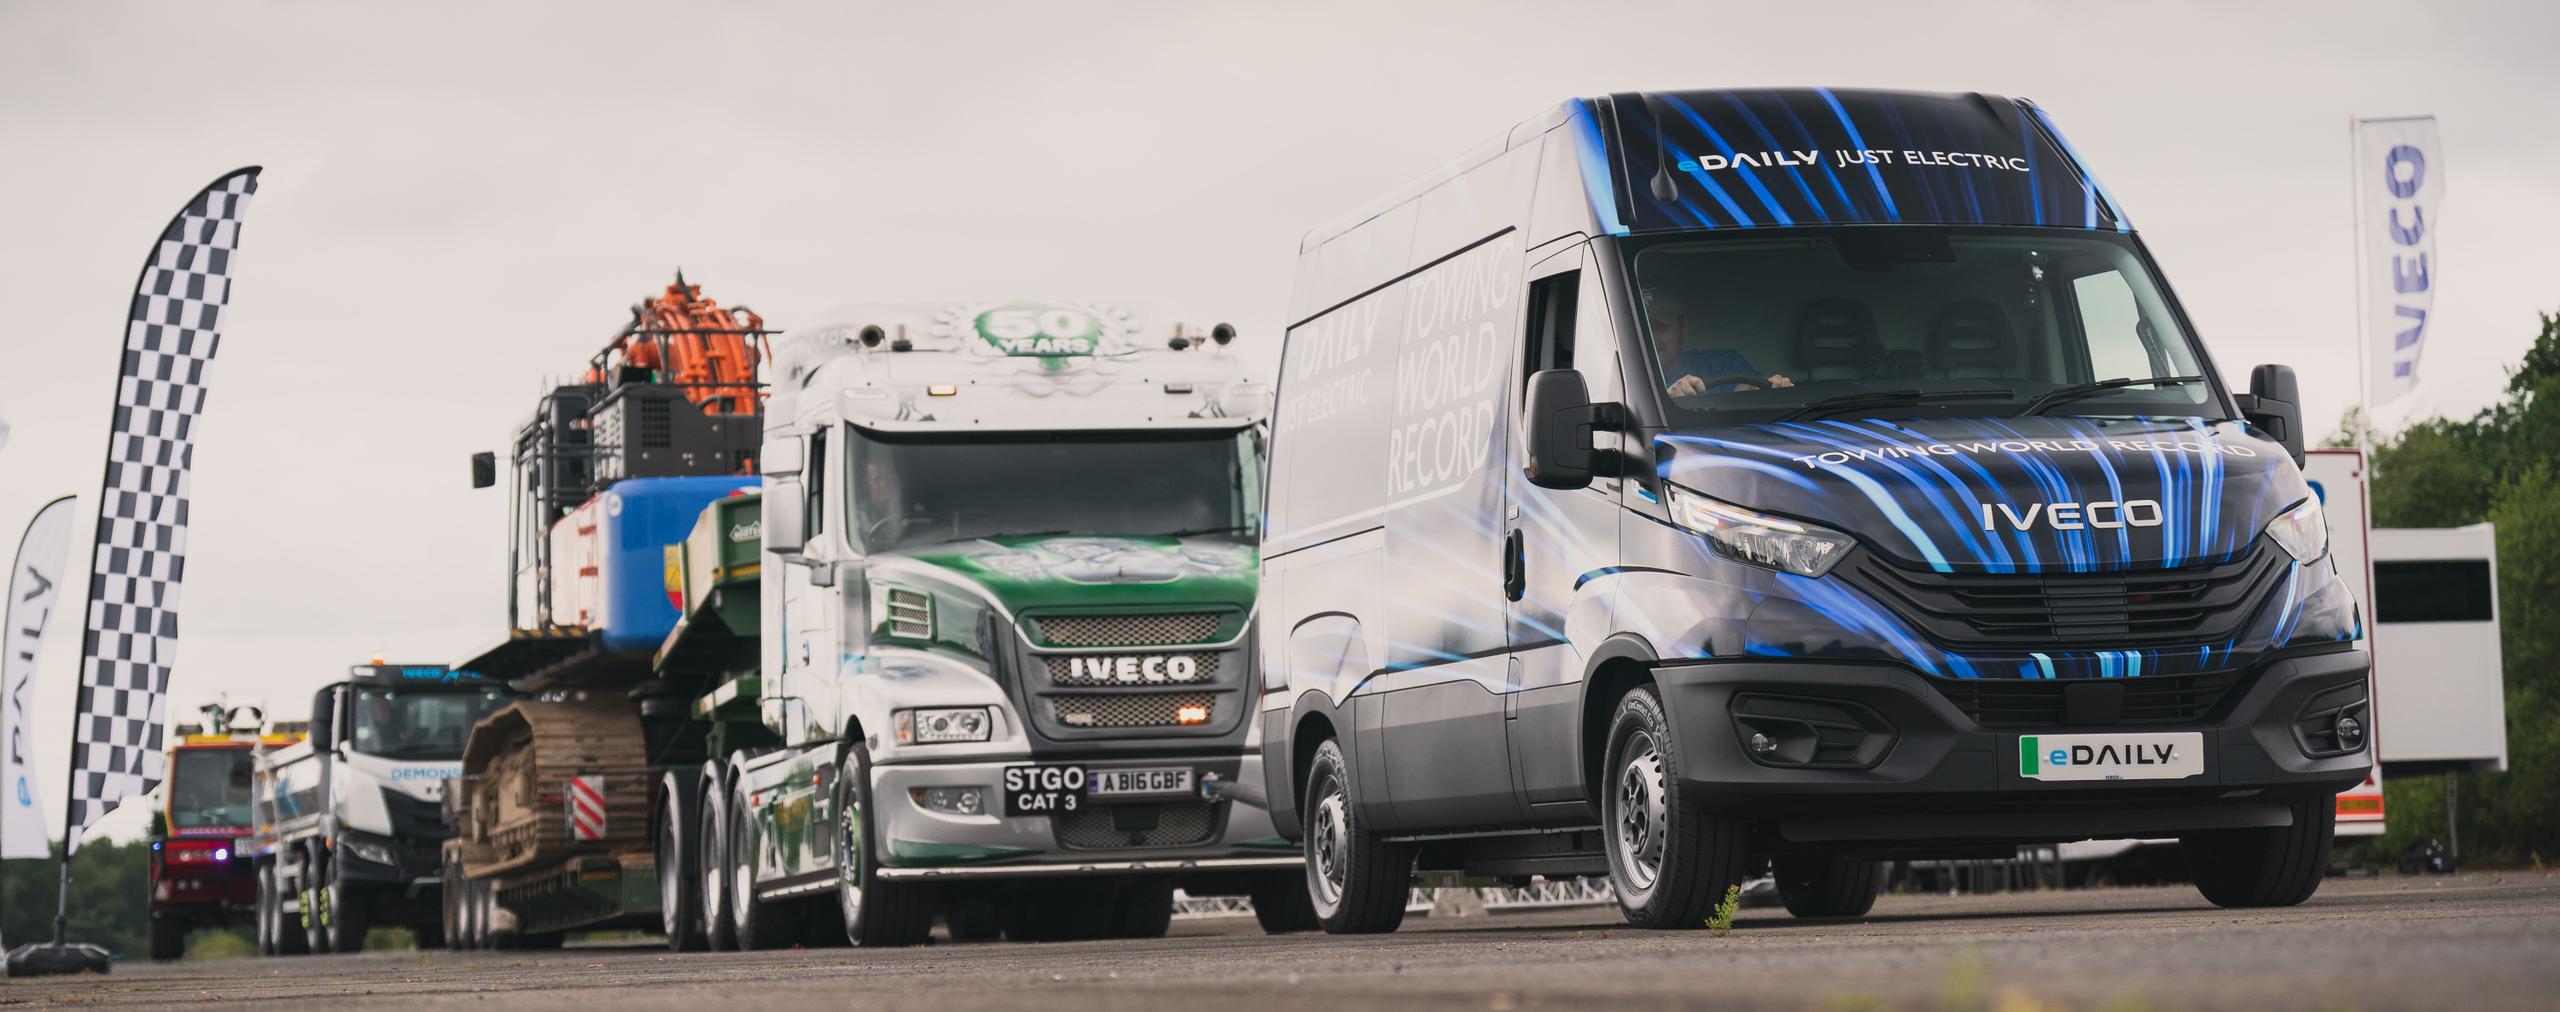 IVECO eDaily tows over 153 tonnes to claim GUINNESS WORLD RECORDS™ title